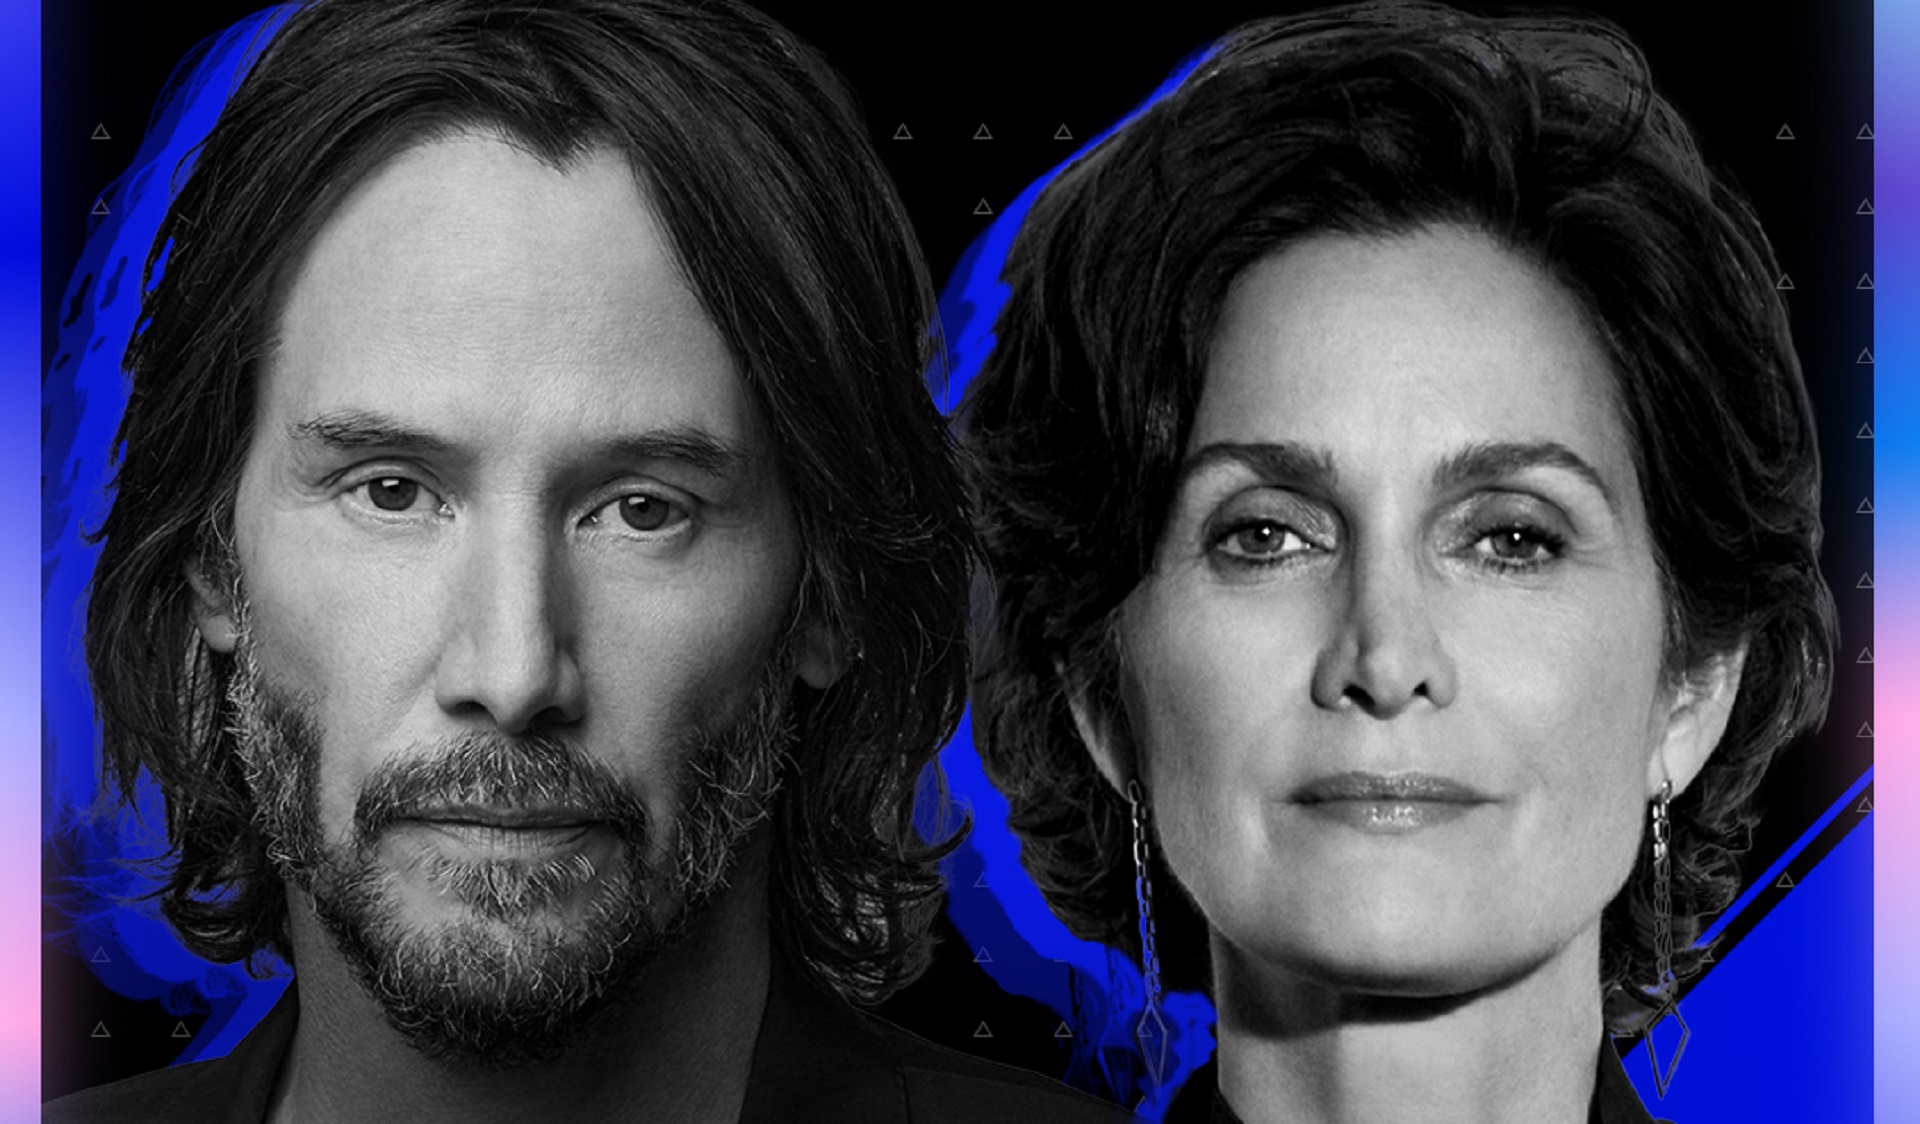 Keanu Reeves and Carie-Anne Moss will be at The Game Awards.